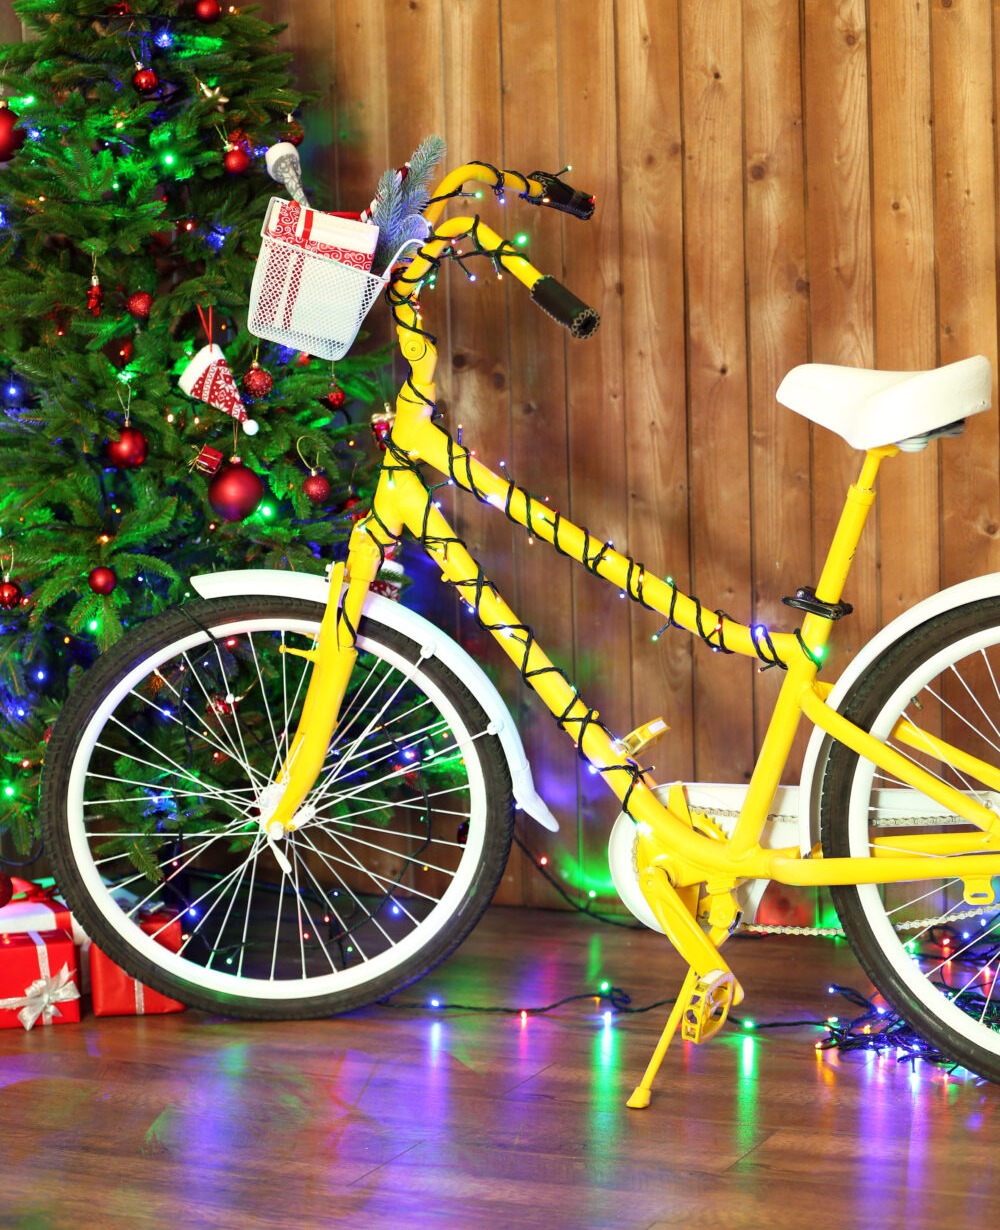 Child's bike with fairy lights wrapped around it near a Christmas tree with presents in the basket